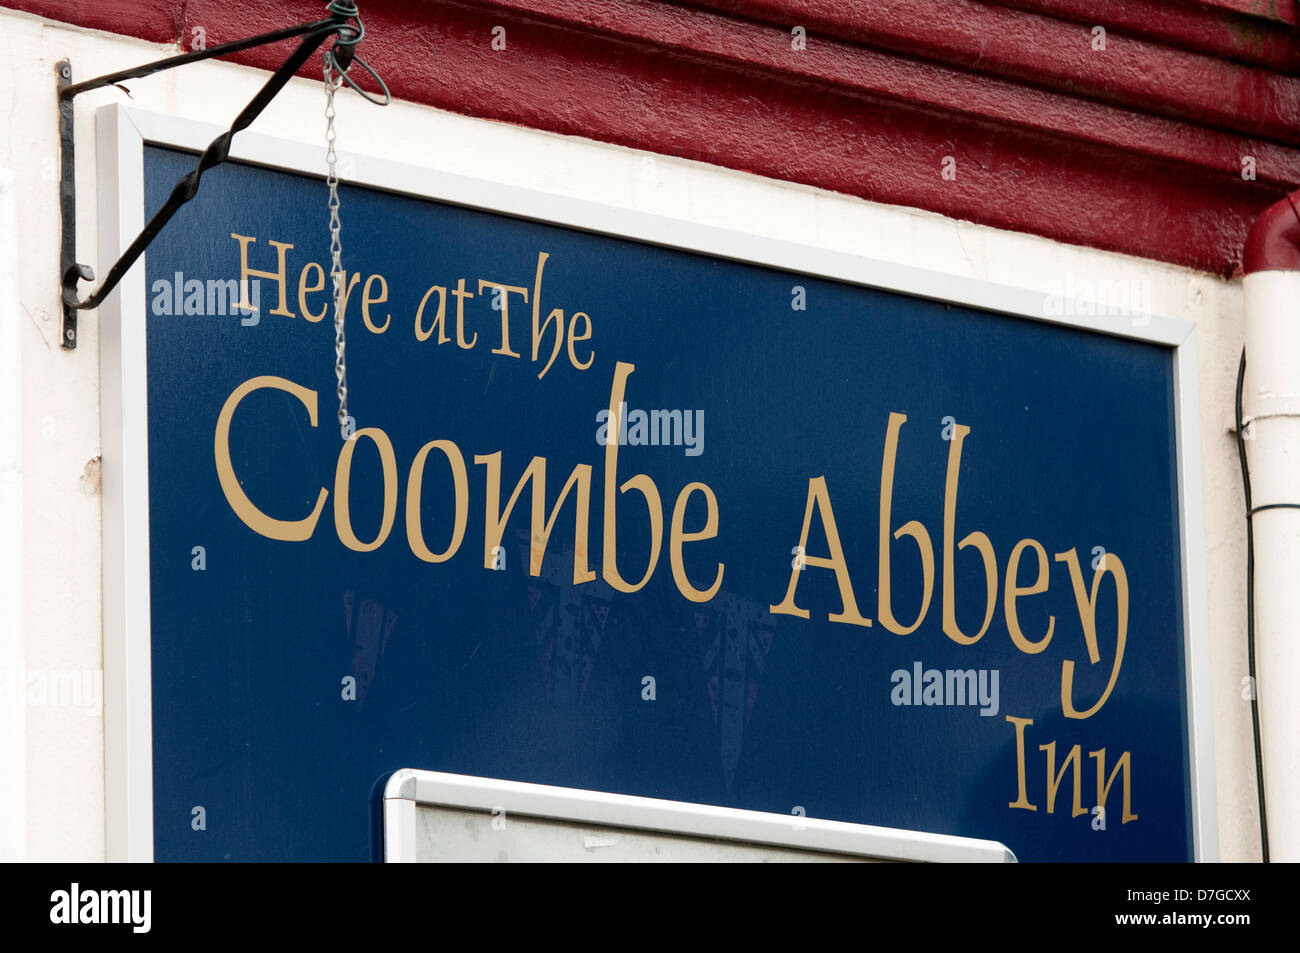 The Coombe Abbey Inn sign, Chapelfields, Coventry, UK Stock Photo